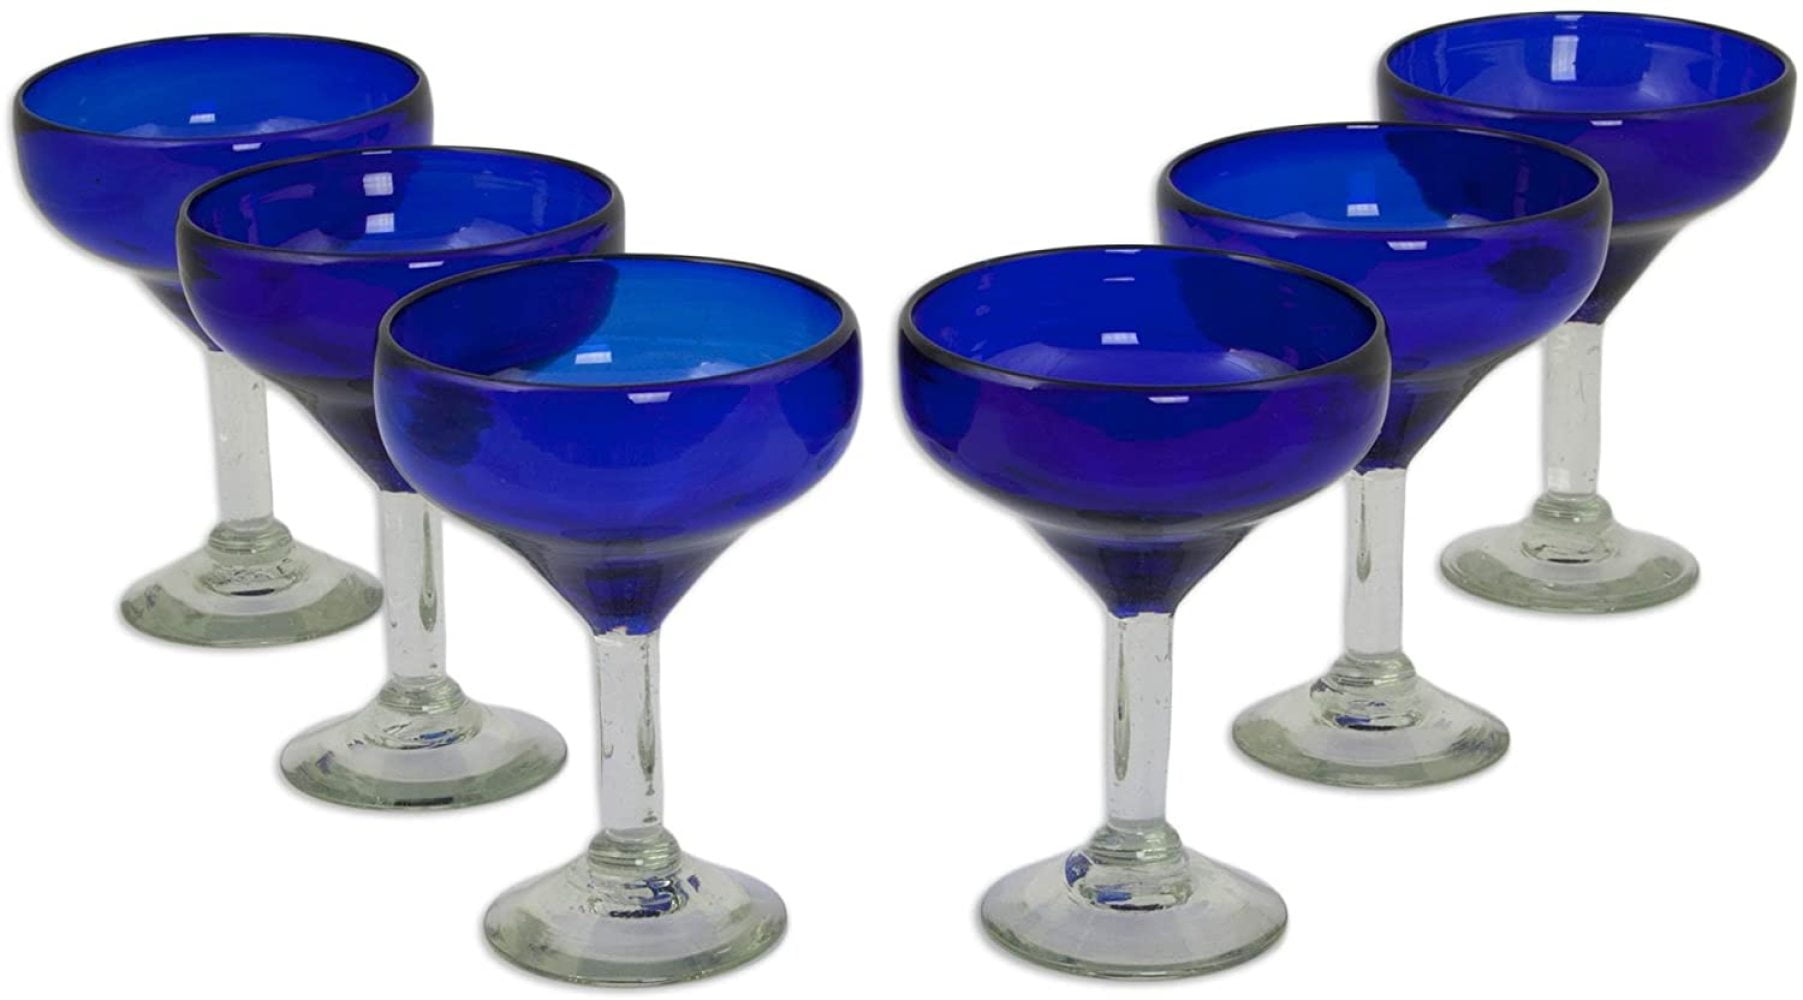 NOVICA Artisan Crafted Dark Blue Recycled Glass Hand Blown Drinking Glasses Set Of 6 'Pure Cobalt' 13 Oz 